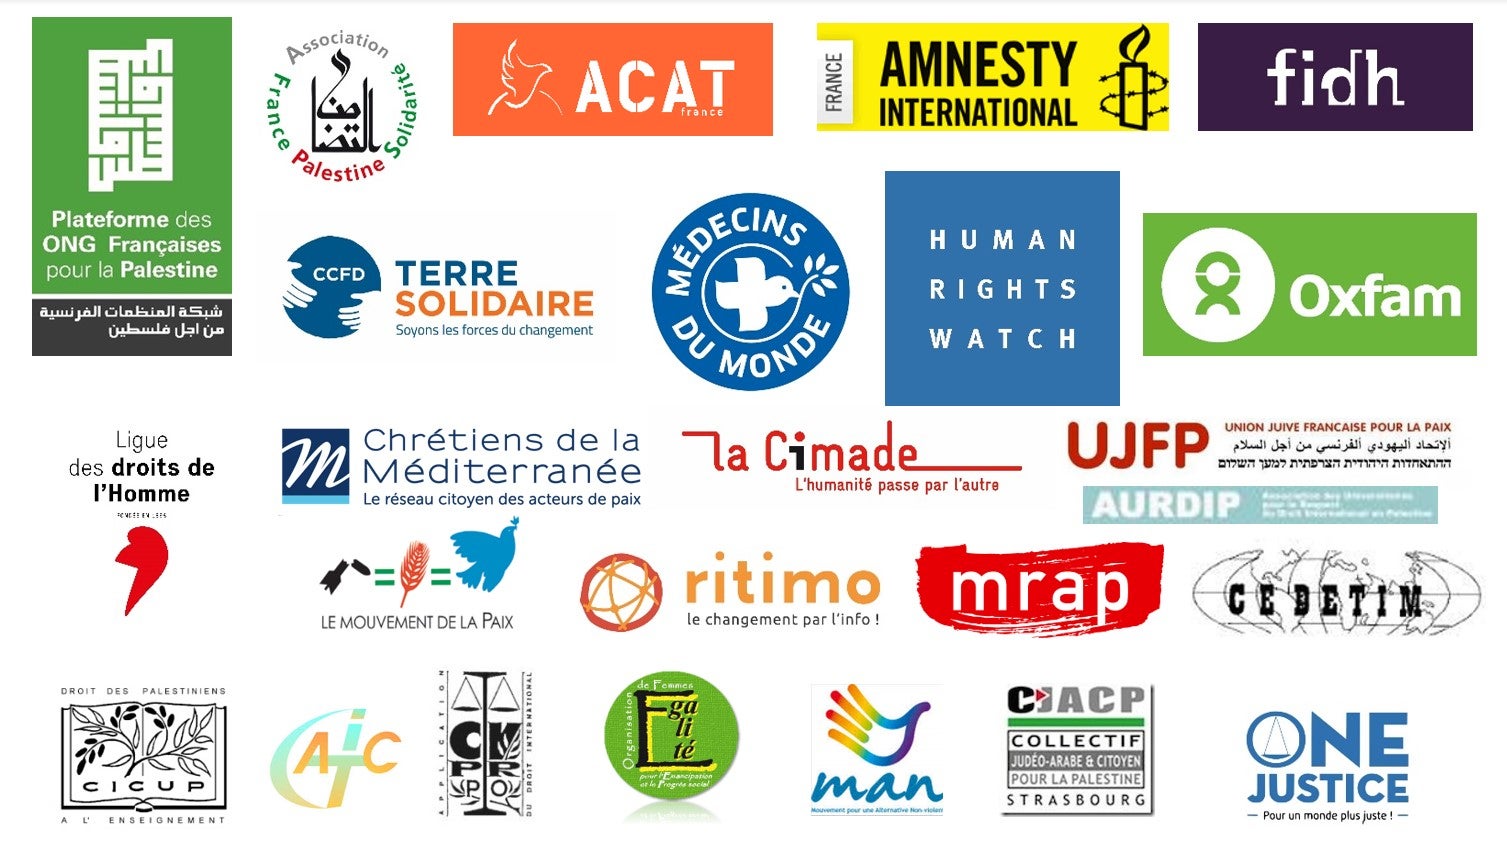 Joint Letter to French Minister of Foreign Affairs in Solidarity with Palestinian Civil Society